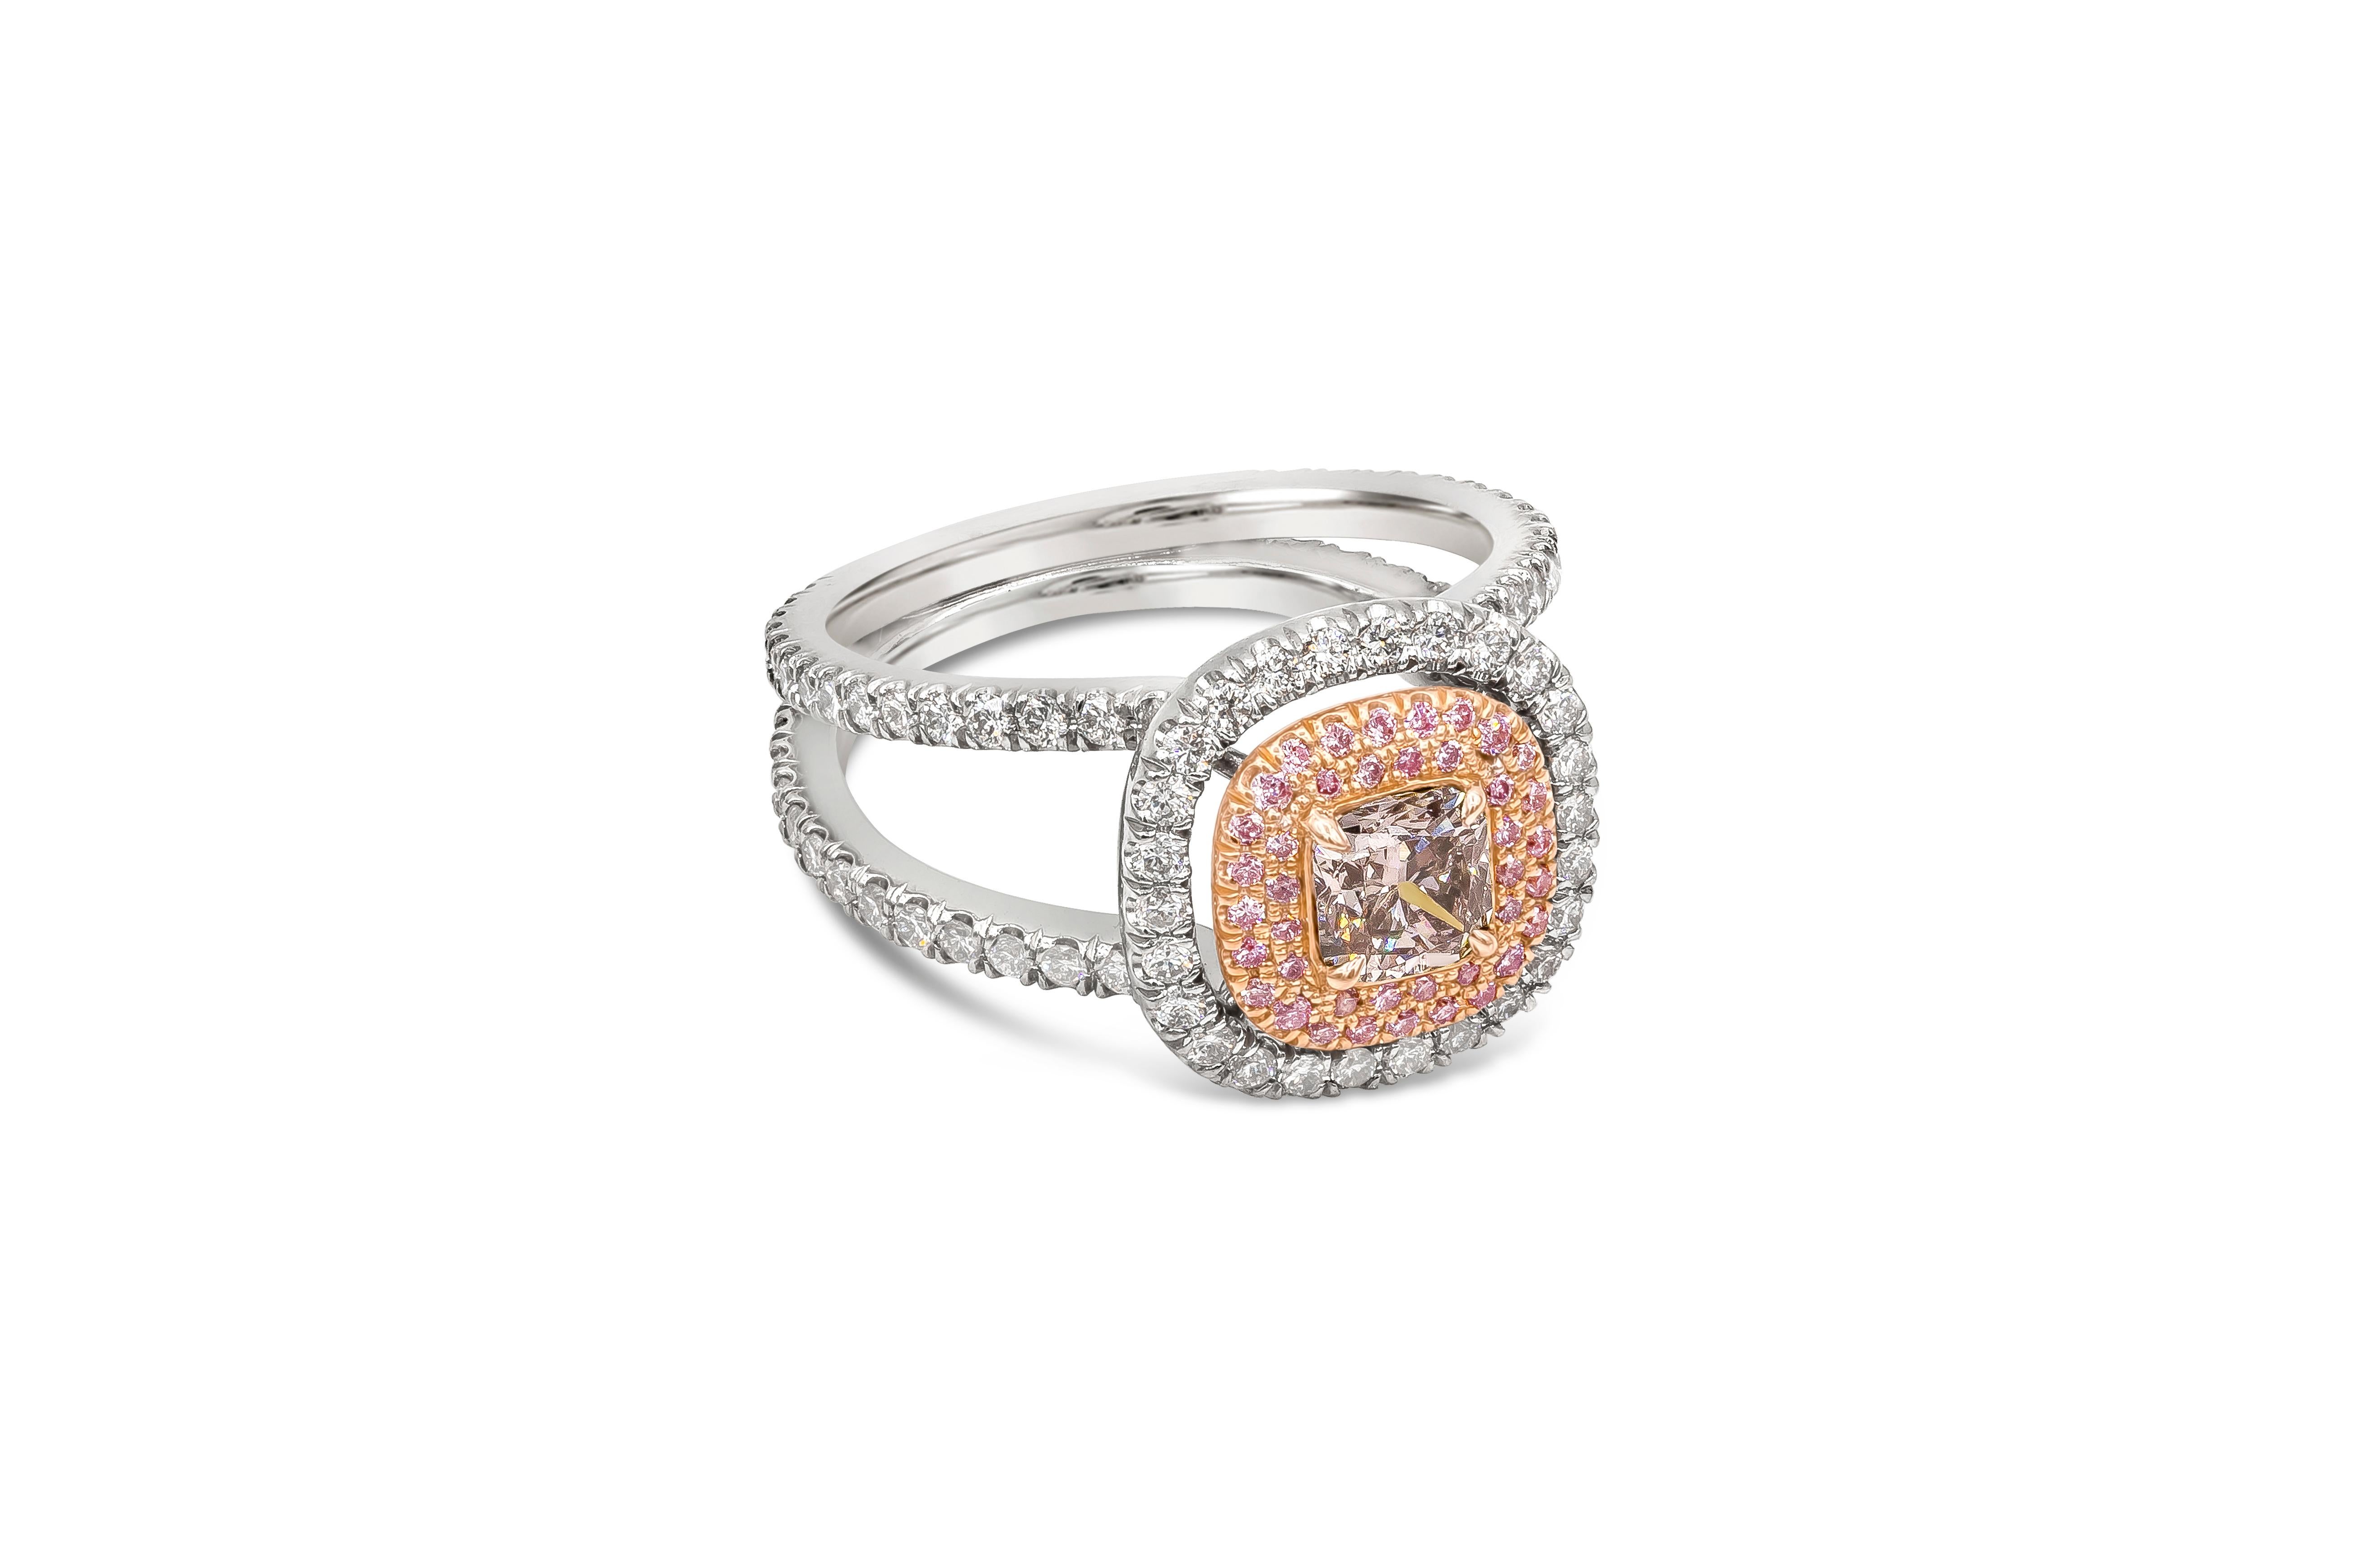 A well-crafted engagement ring showcasing a 0.63 carat cushion cut diamond certified by GIA as Fancy Pink-Brown color set in 18K rose gold. Set in a double halo setting mounting of pink and white diamonds, in a diamond encrusted split shank band